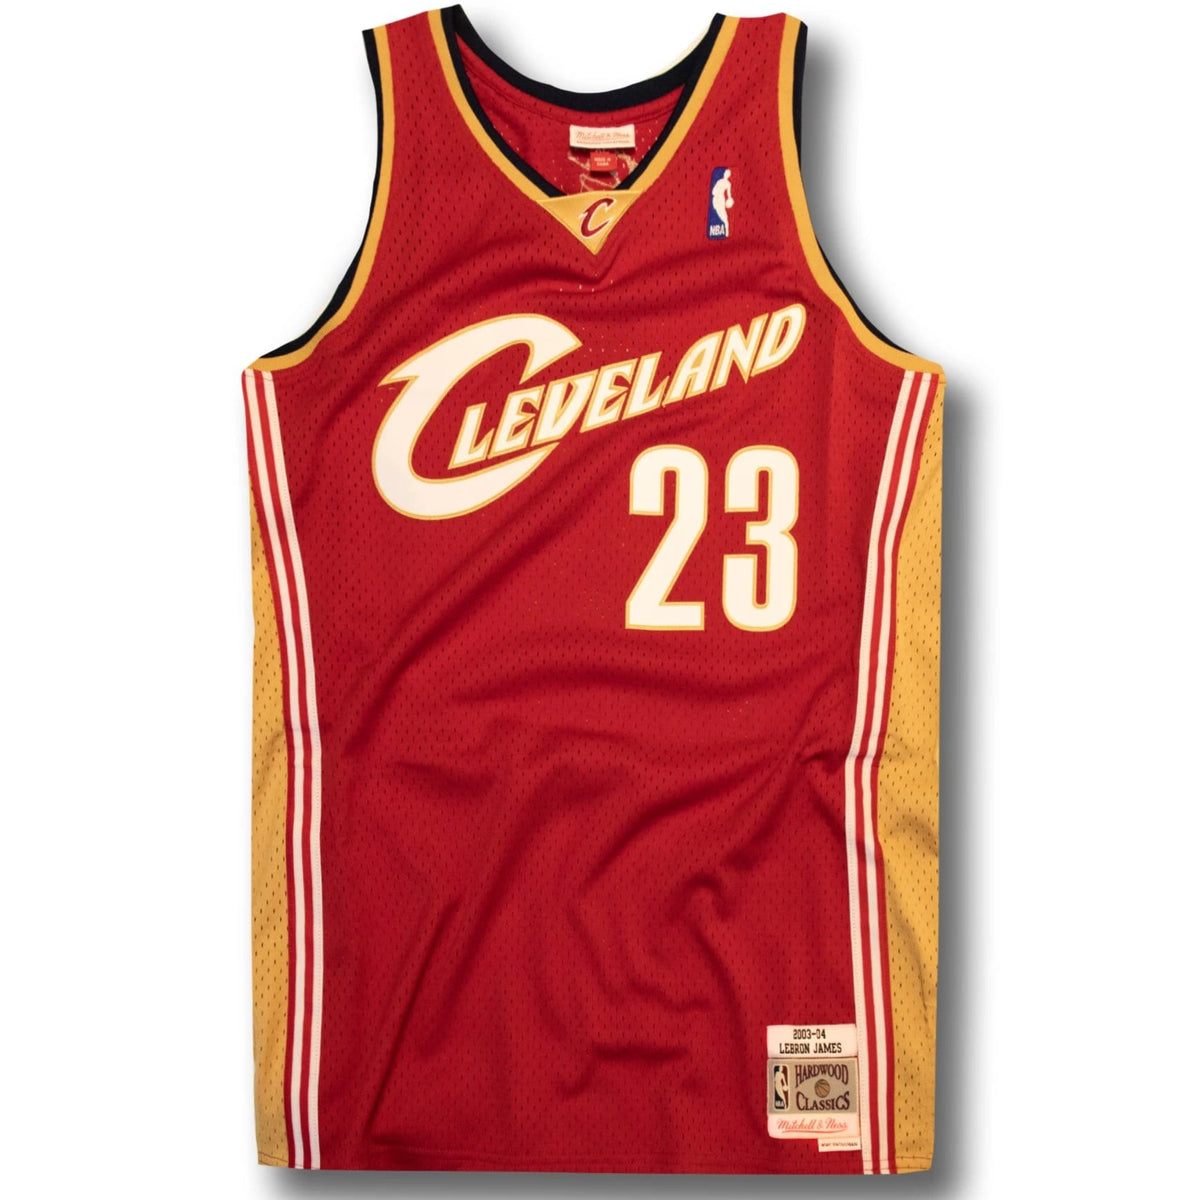 lebrons jersey number